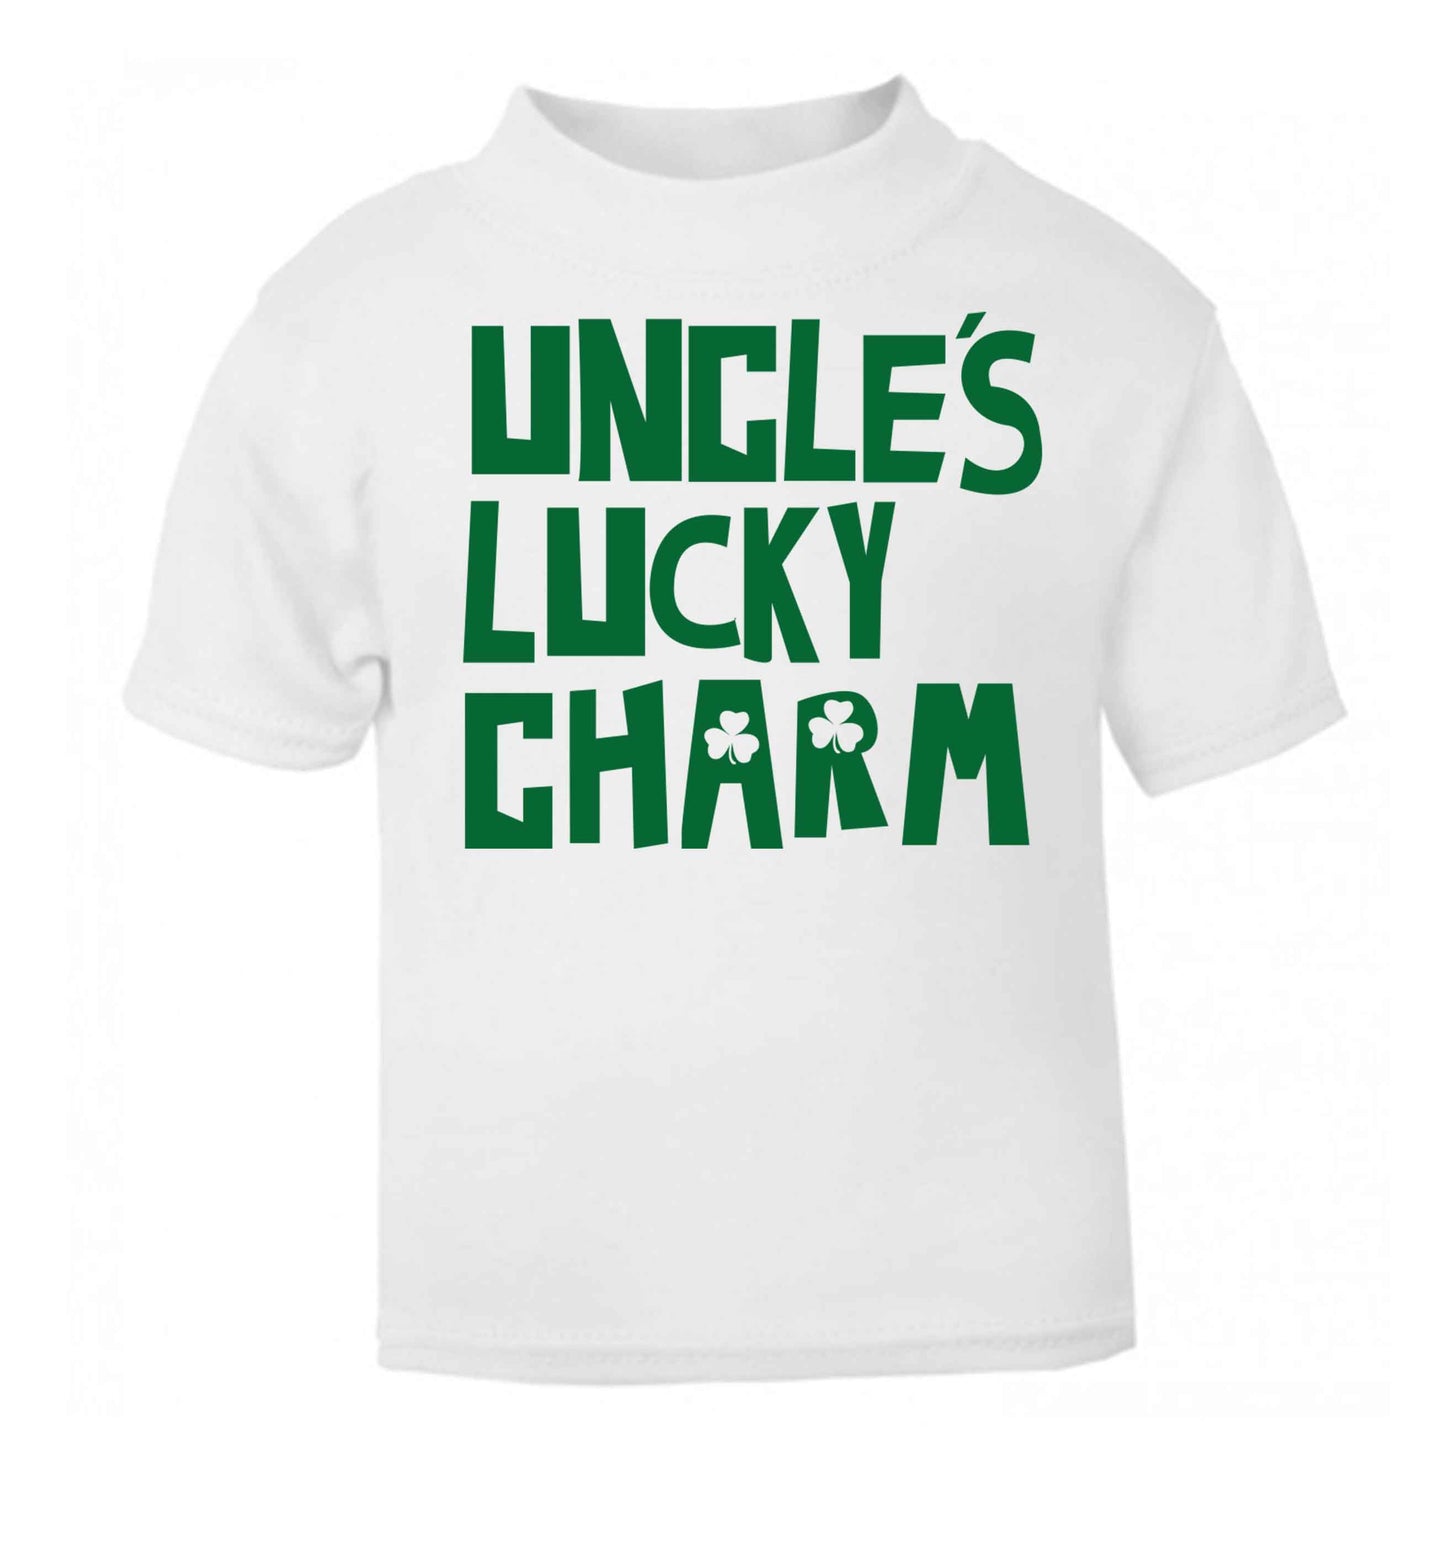 Uncles lucky charm white baby toddler Tshirt 2 Years